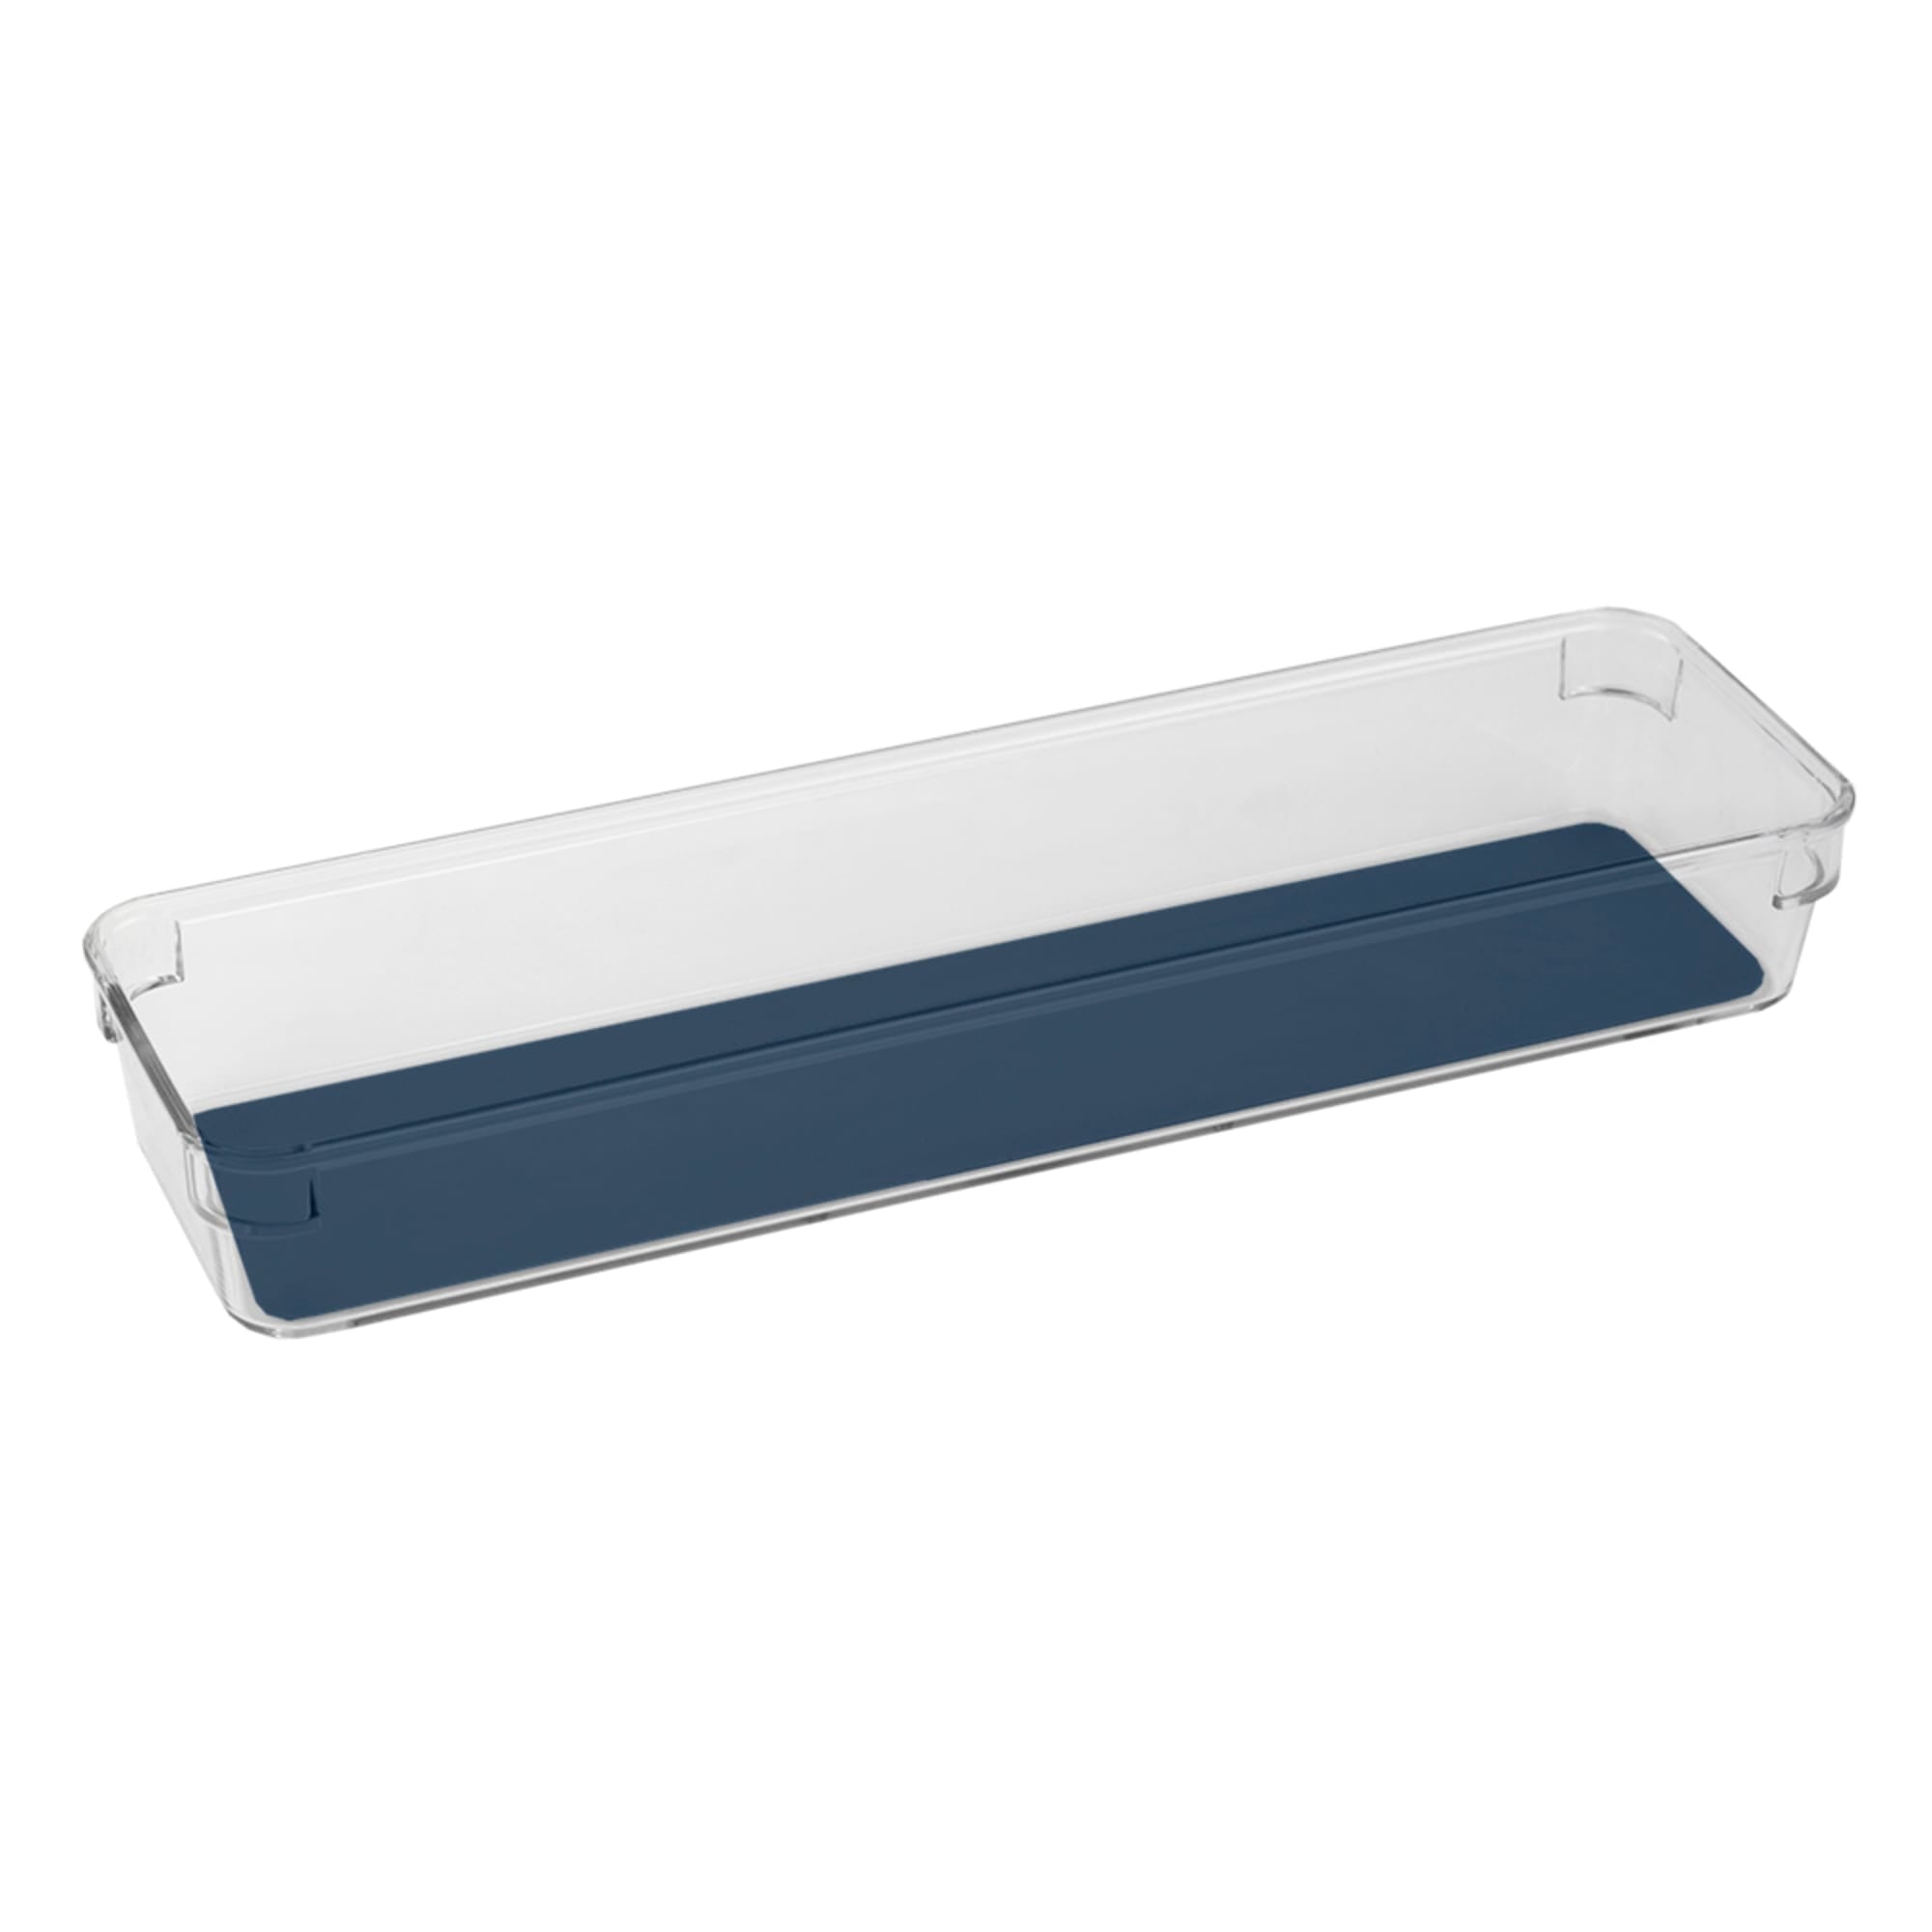 Michael Graves Design 12.75" x 3.75" Drawer Organizer with Indigo Rubber Lining $3.00 EACH, CASE PACK OF 24